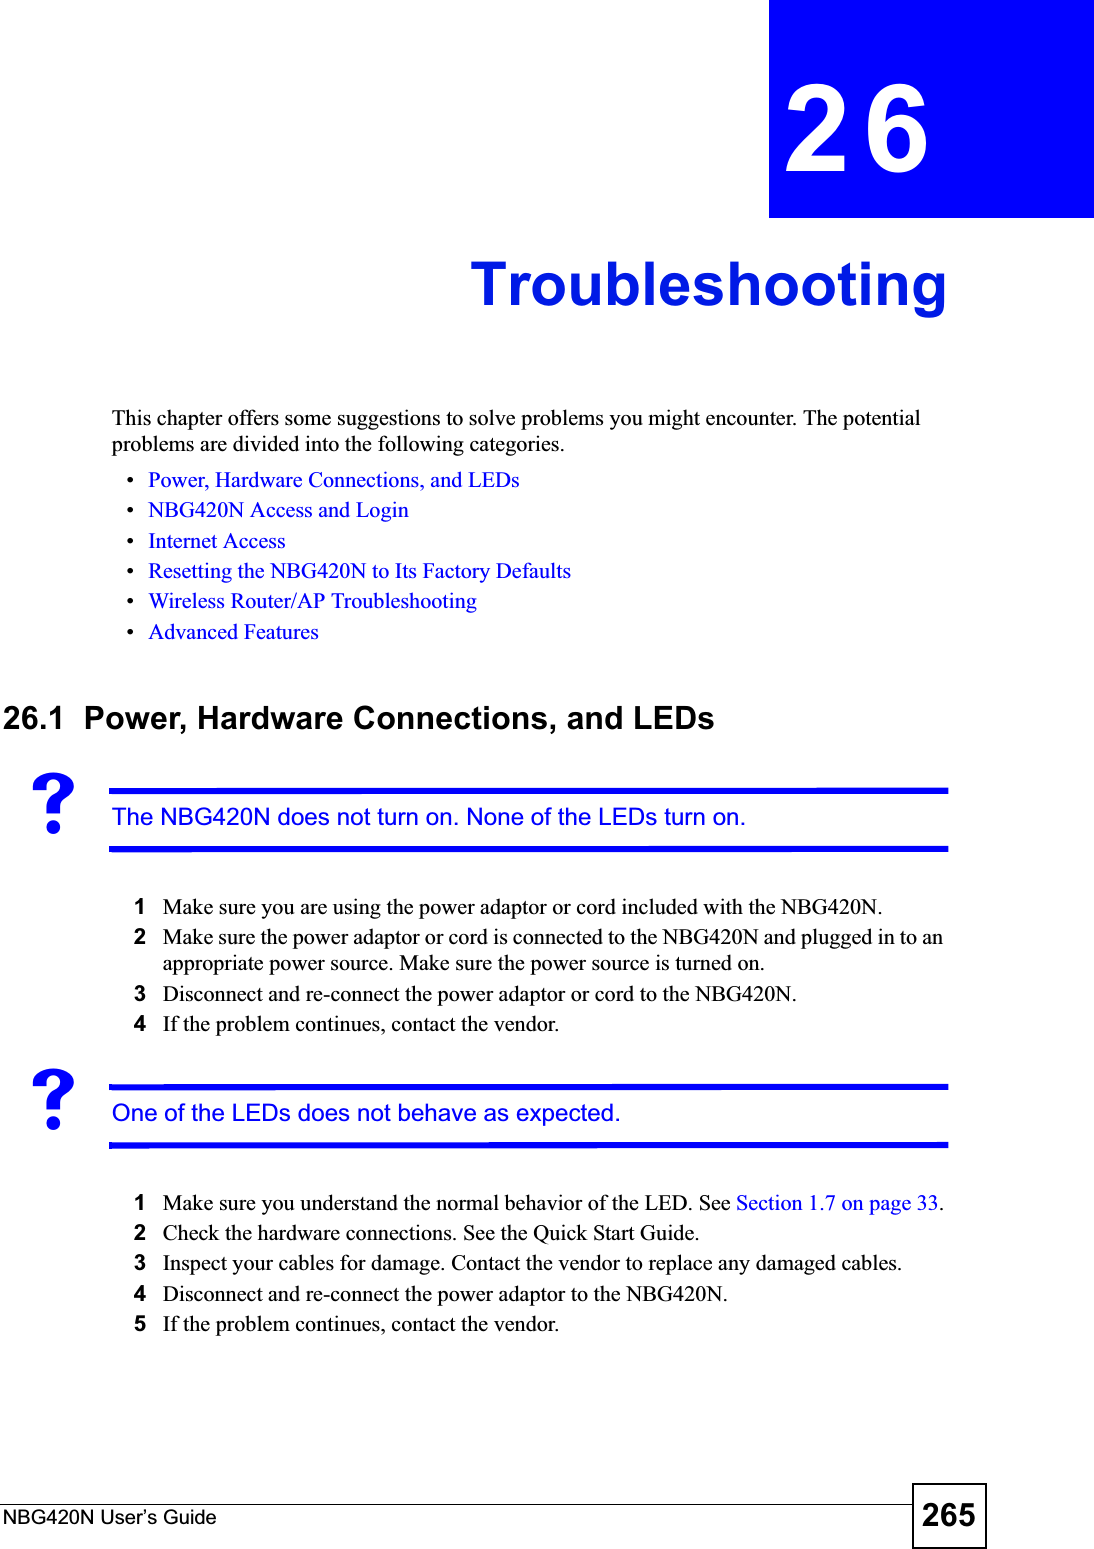 NBG420N User’s Guide 265CHAPTER 26TroubleshootingThis chapter offers some suggestions to solve problems you might encounter. The potential problems are divided into the following categories. •Power, Hardware Connections, and LEDs•NBG420N Access and Login•Internet Access•Resetting the NBG420N to Its Factory Defaults•Wireless Router/AP Troubleshooting•Advanced Features26.1  Power, Hardware Connections, and LEDsVThe NBG420N does not turn on. None of the LEDs turn on.1Make sure you are using the power adaptor or cord included with the NBG420N.2Make sure the power adaptor or cord is connected to the NBG420N and plugged in to an appropriate power source. Make sure the power source is turned on.3Disconnect and re-connect the power adaptor or cord to the NBG420N.4If the problem continues, contact the vendor.VOne of the LEDs does not behave as expected.1Make sure you understand the normal behavior of the LED. See Section 1.7 on page 33.2Check the hardware connections. See the Quick Start Guide. 3Inspect your cables for damage. Contact the vendor to replace any damaged cables.4Disconnect and re-connect the power adaptor to the NBG420N. 5If the problem continues, contact the vendor.